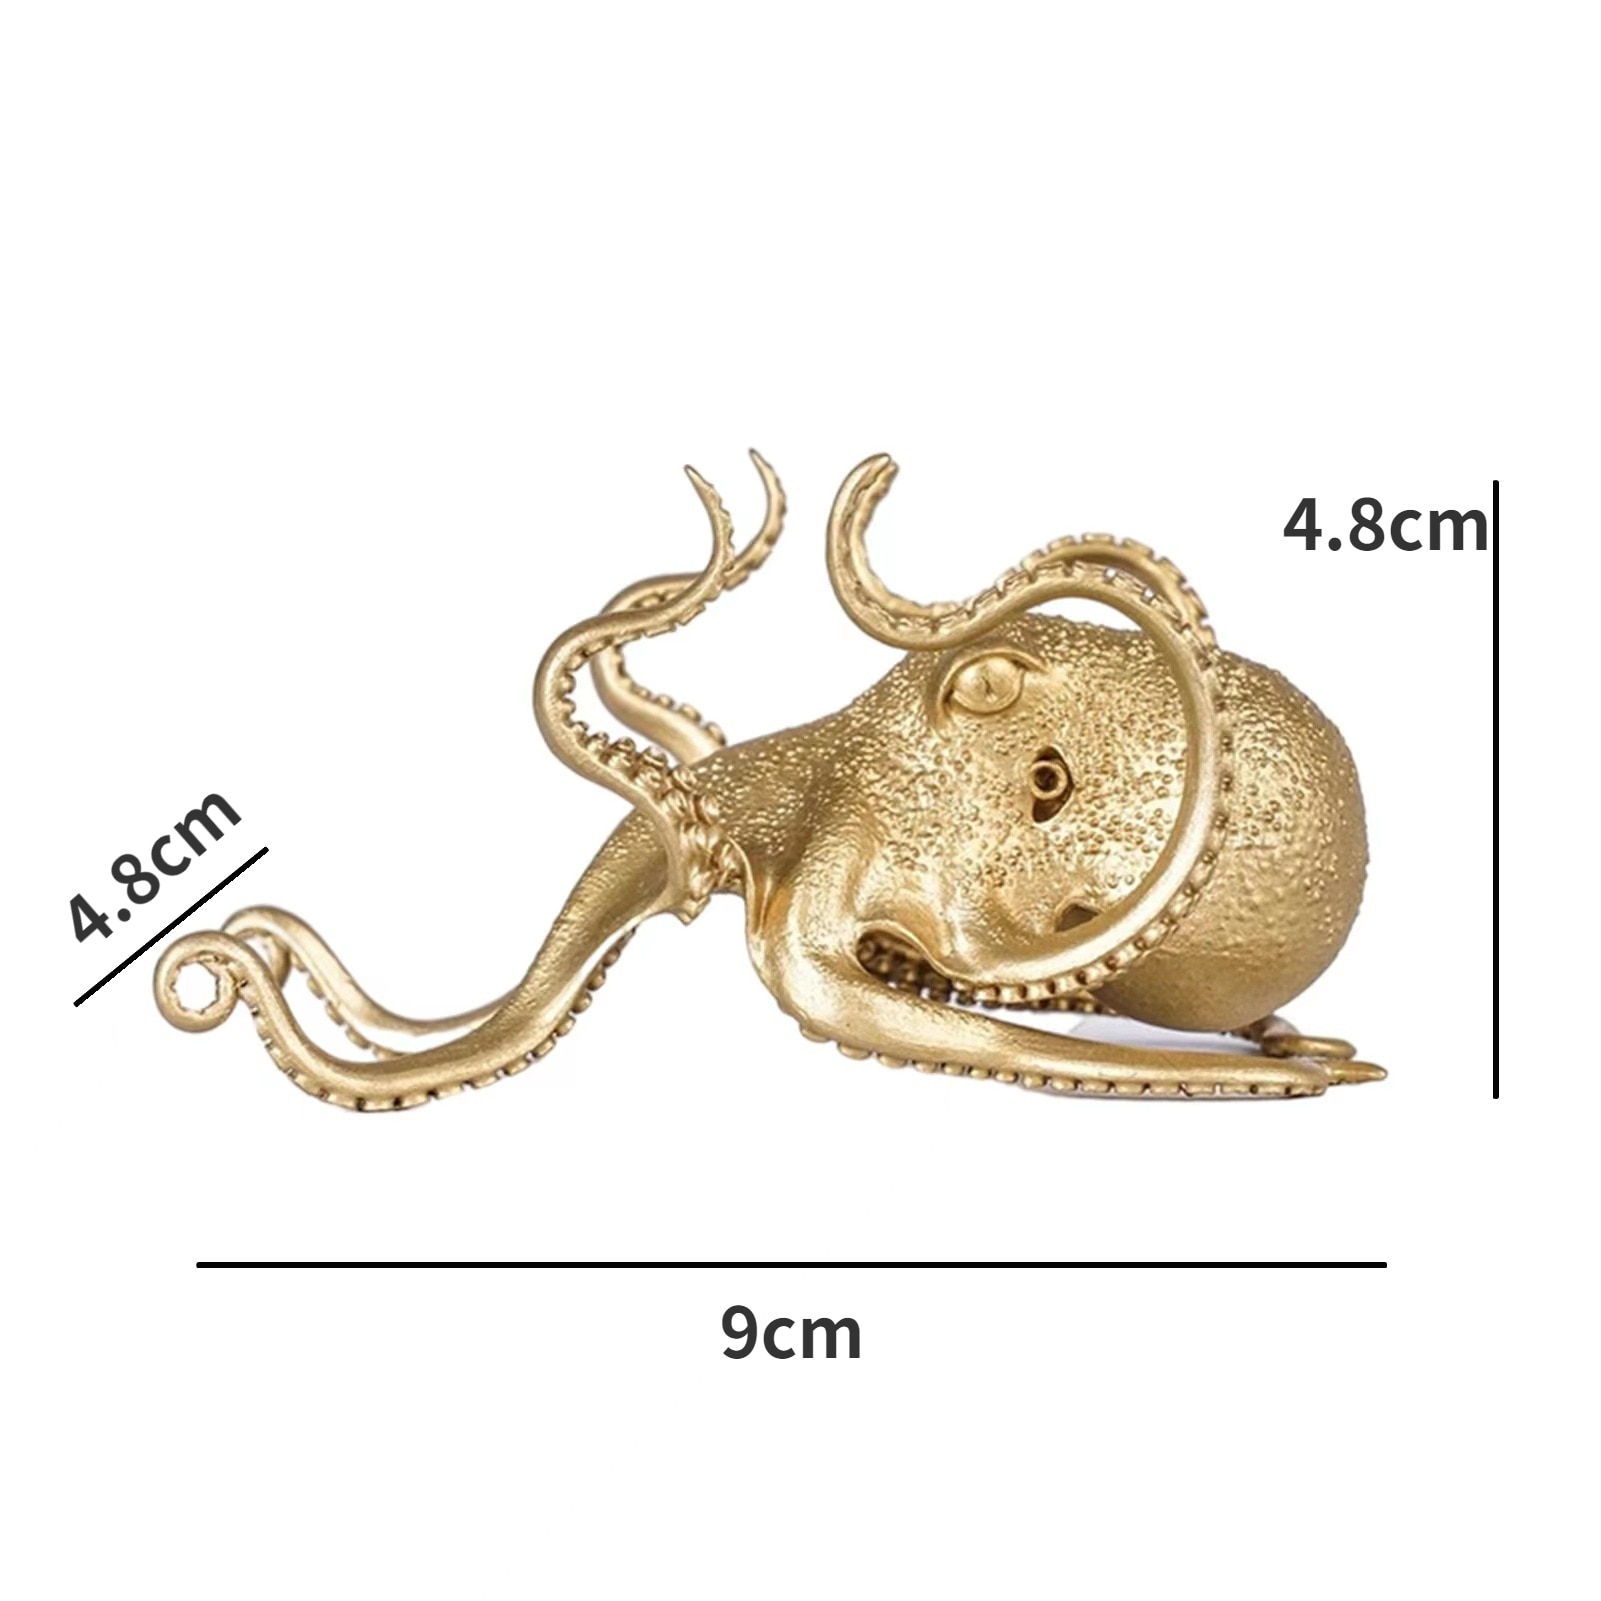 Creative Octopus Mobile Phone Stand Gold Octopus Decorative Ornament Pen Holder 5